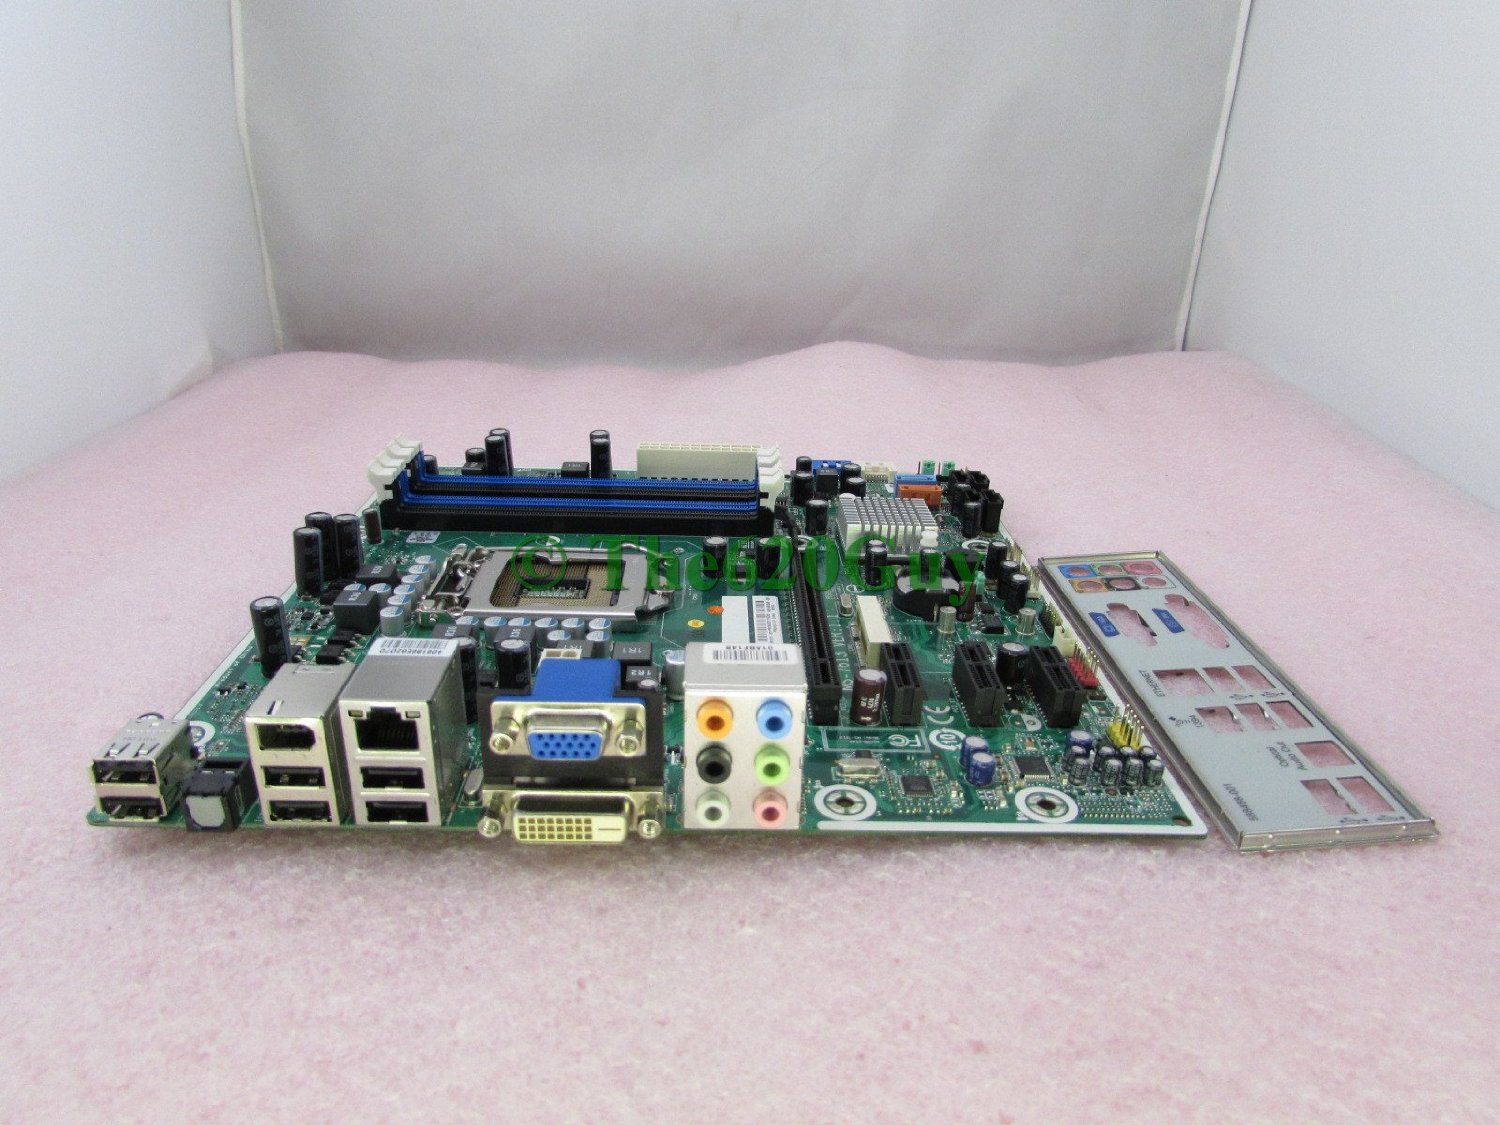 Pegatron Ipm41 D3 Motherboard Drivers Free Download - potenttropical